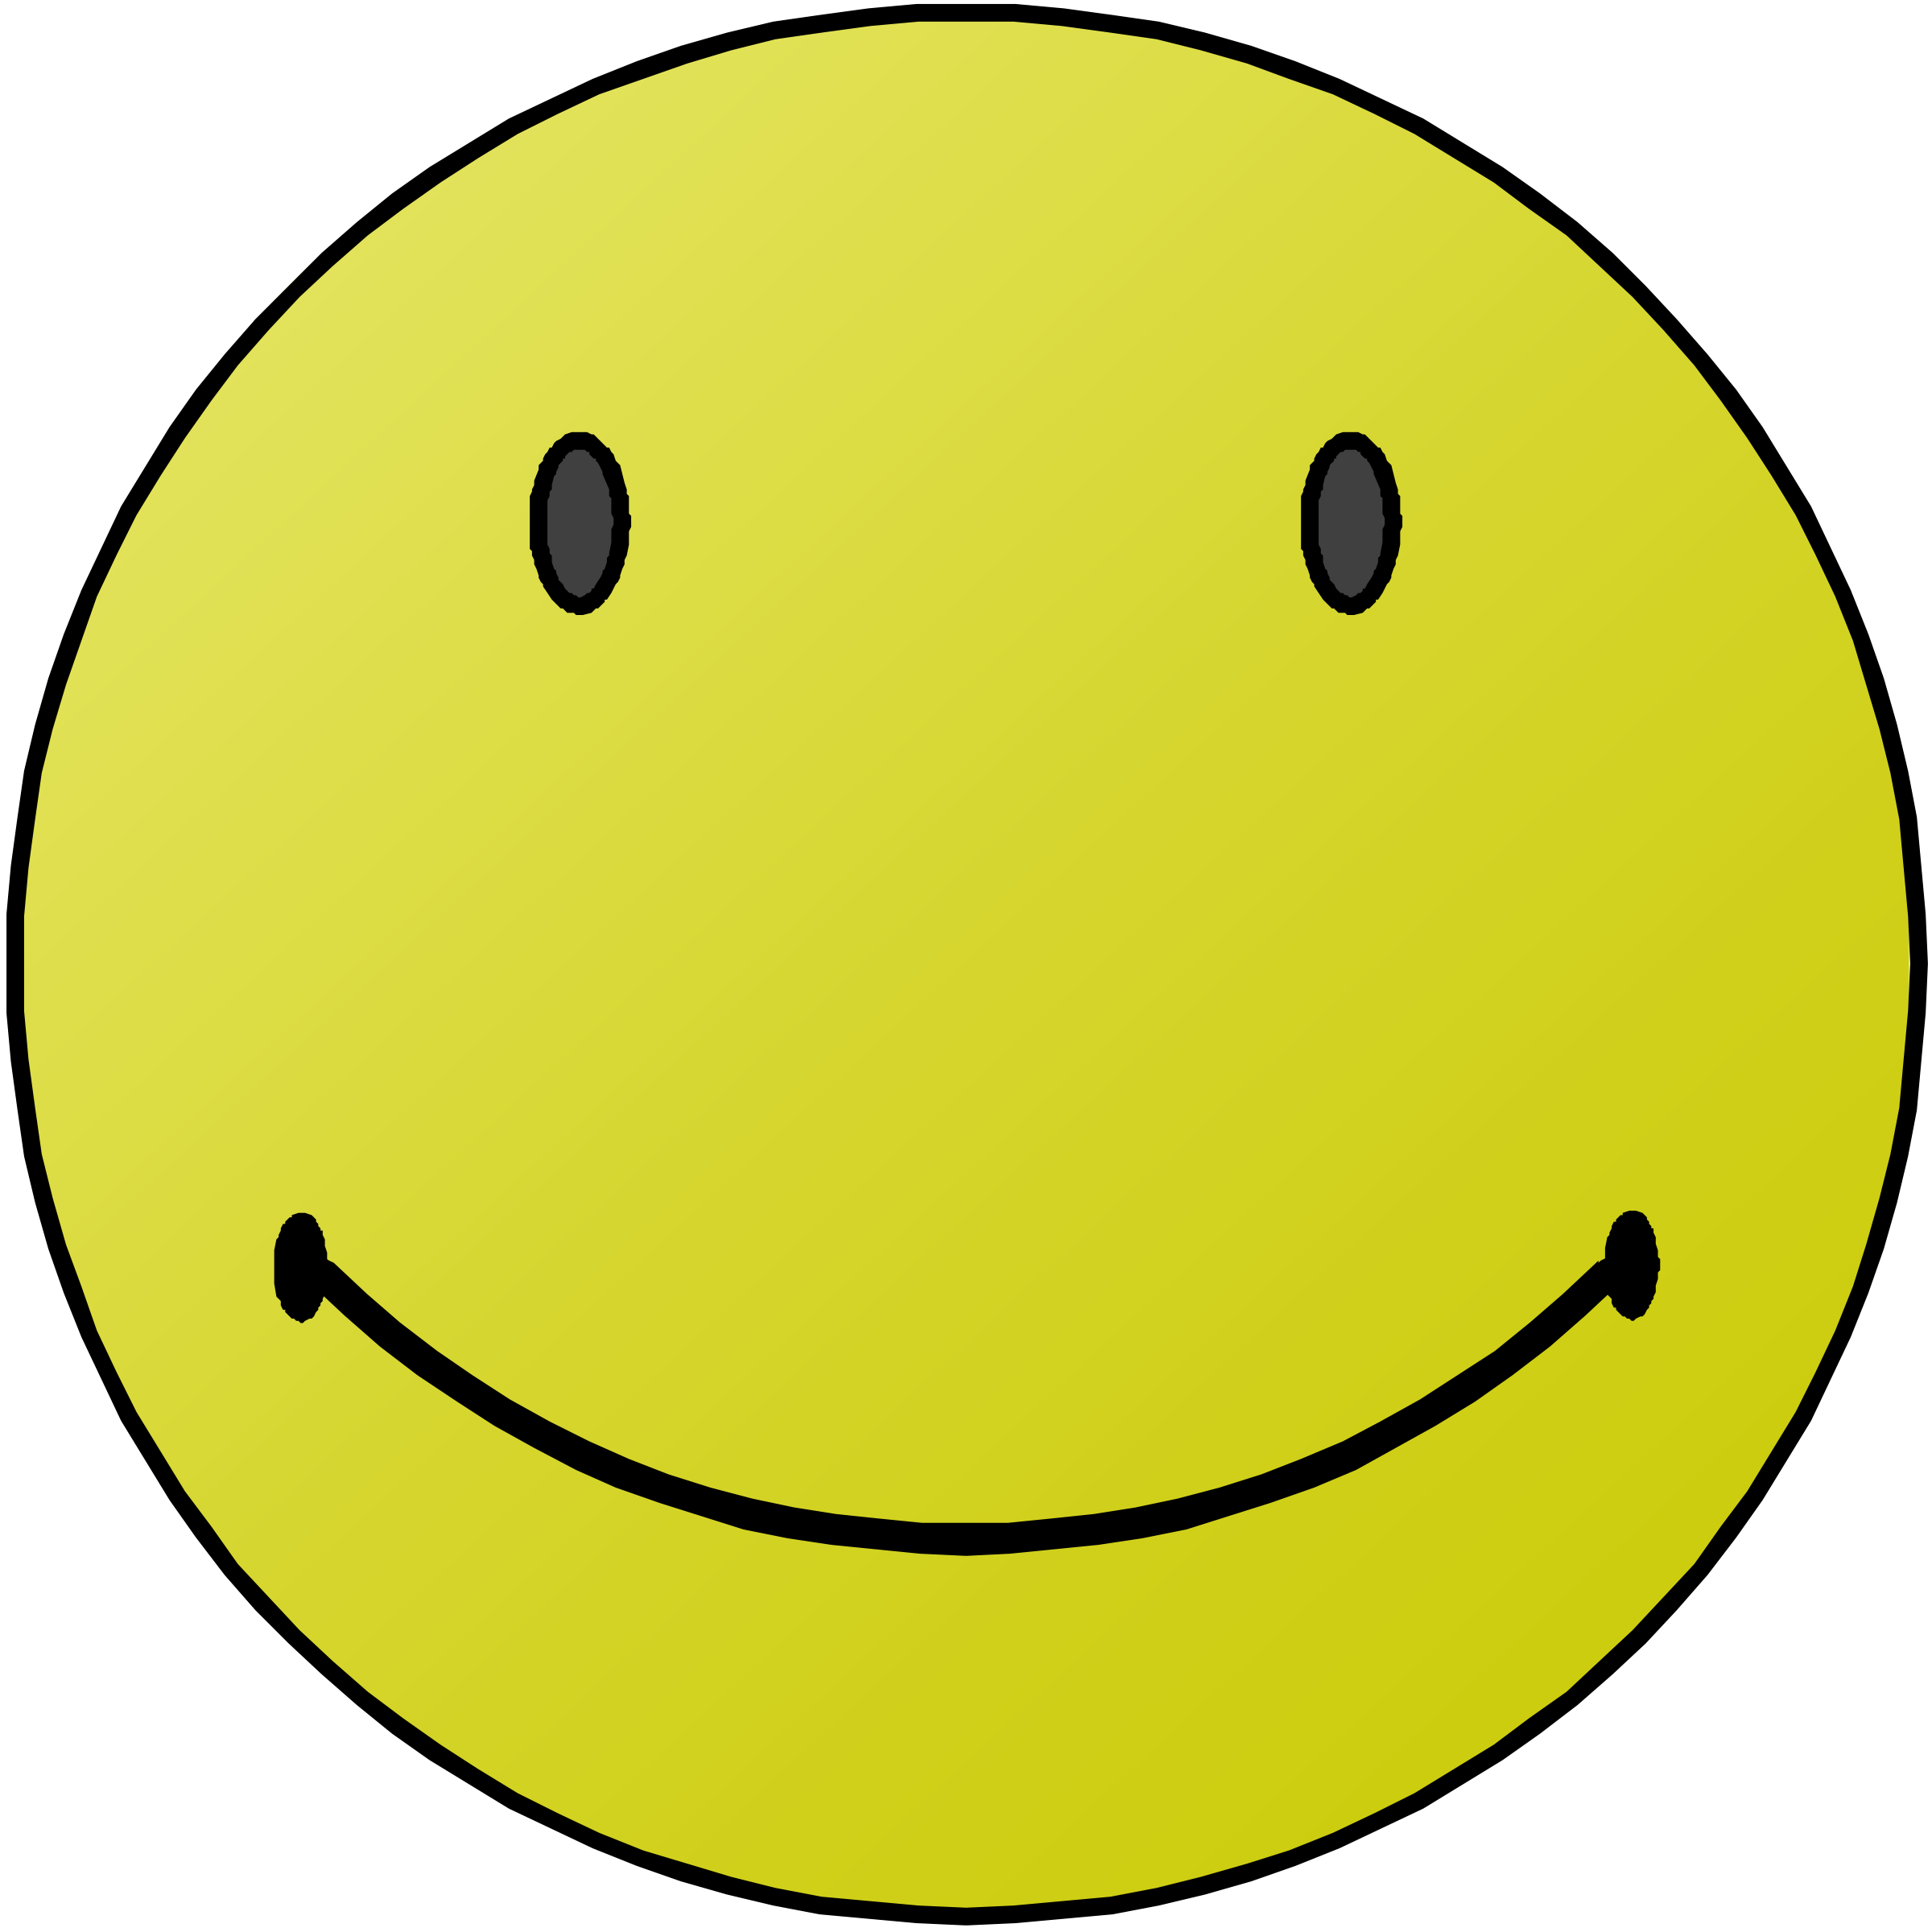 Happy face clip art on facebook free clipart images